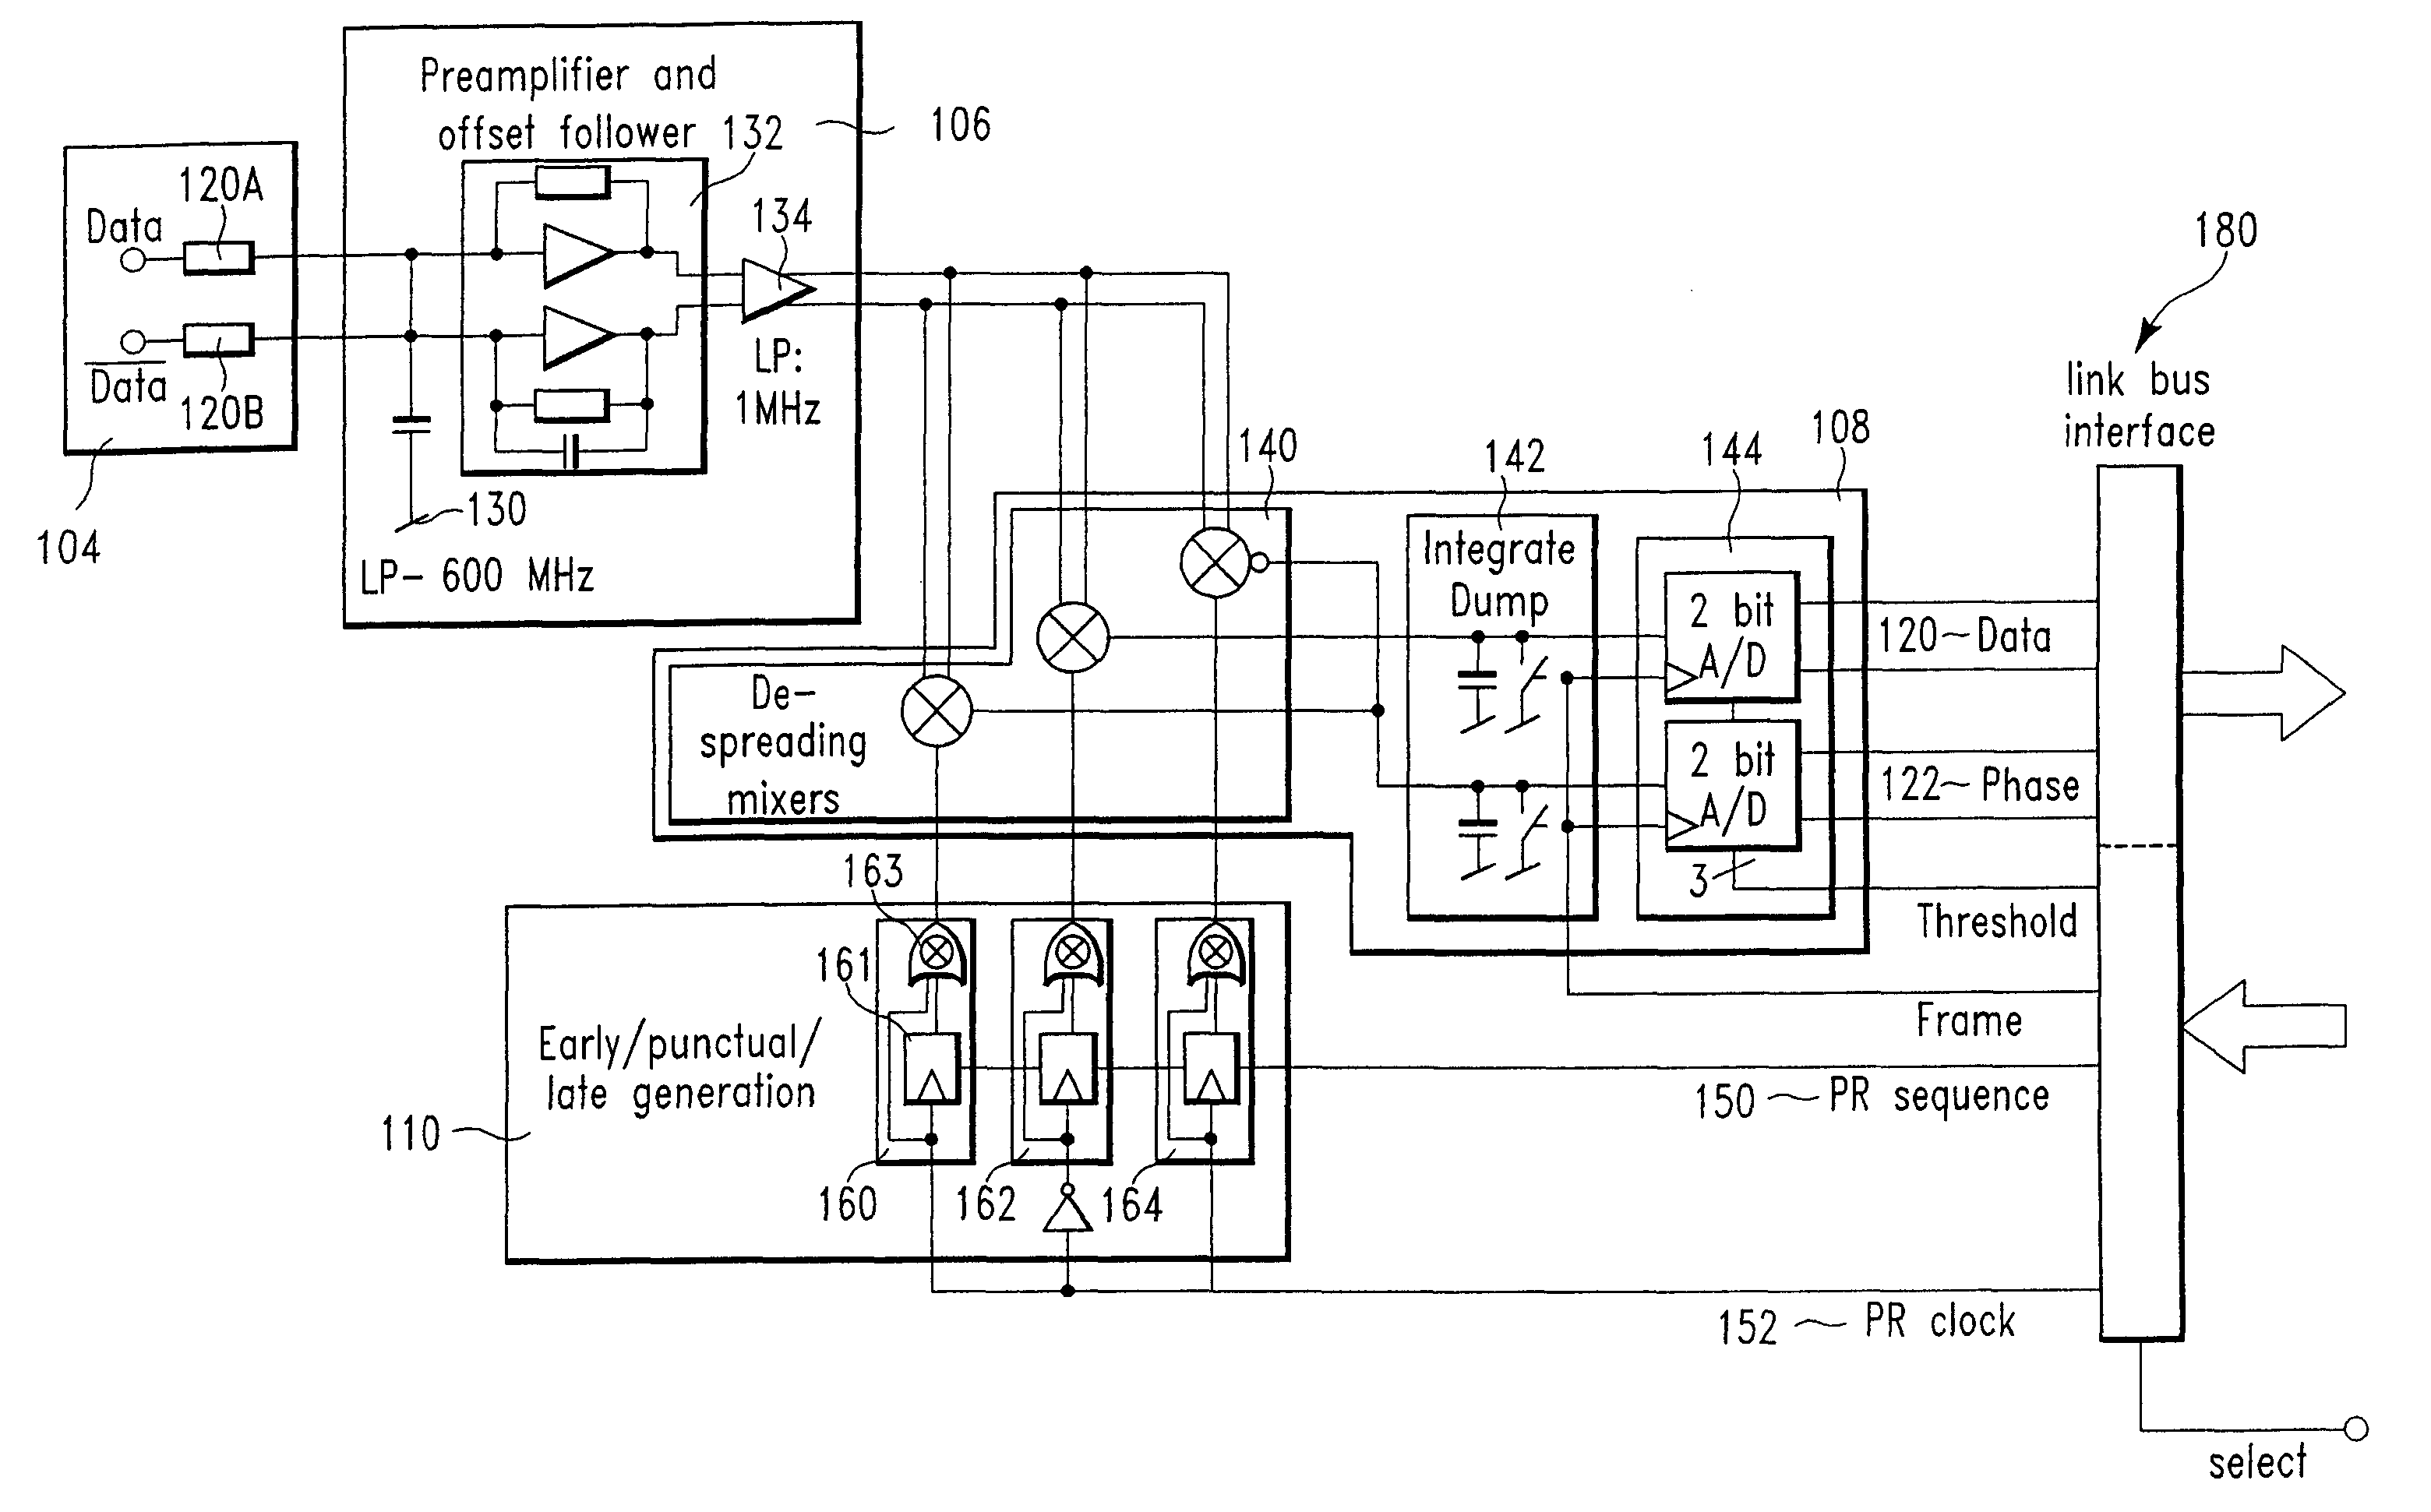 Apparatus for transmitting data and additional information simultaneously within a wire-based communication system